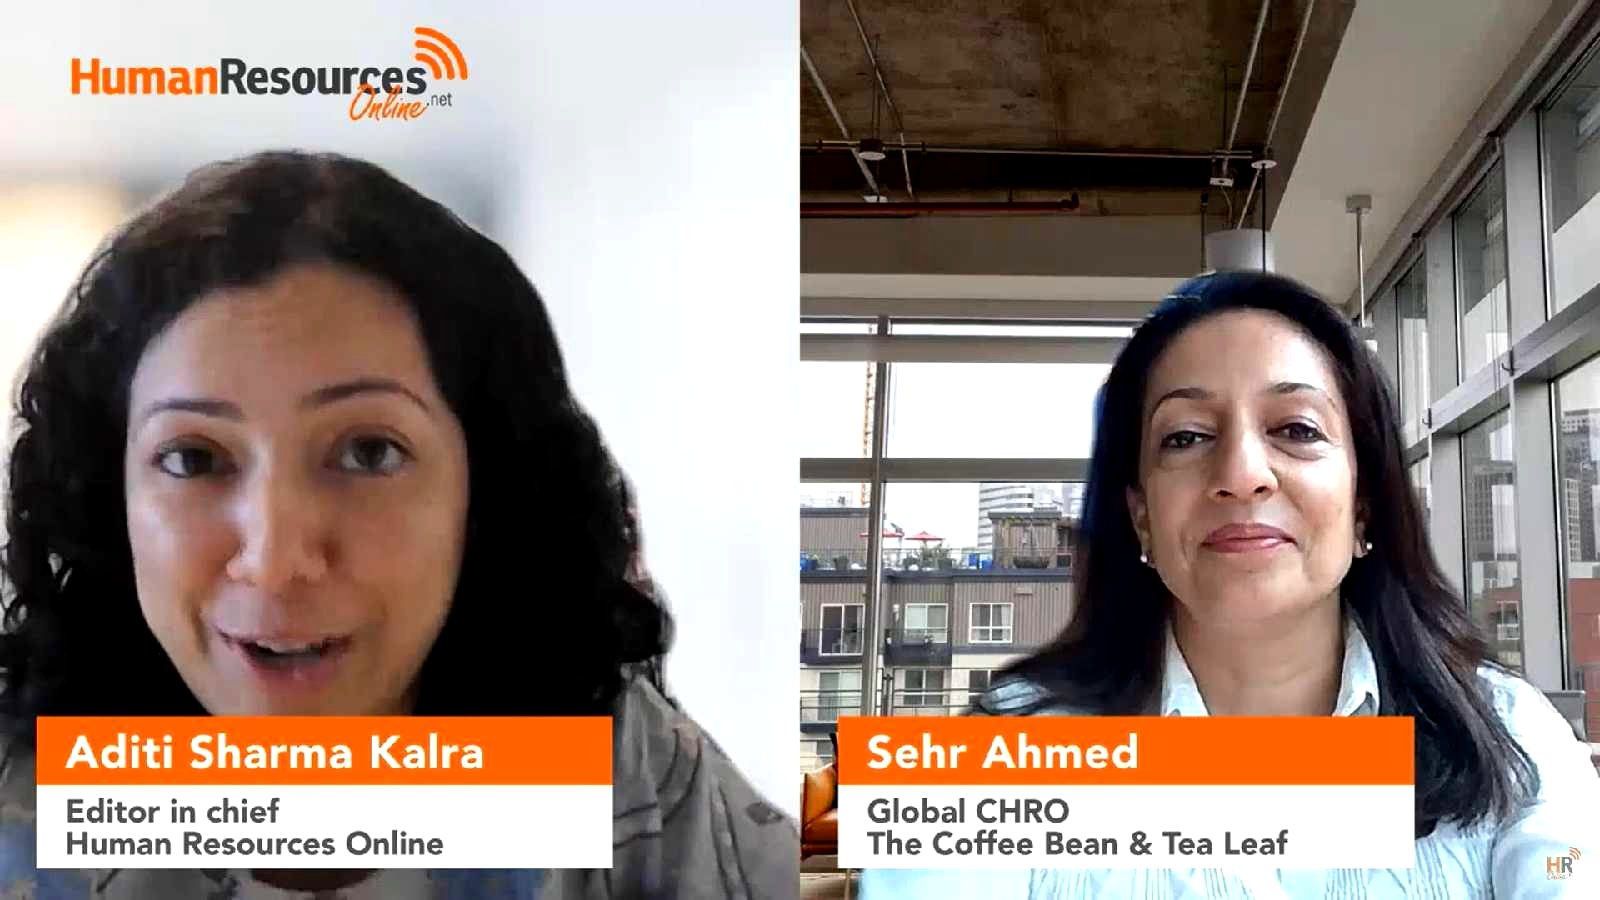 HR OnScreen: Sehr Ahmed, Global CHRO, The Coffee Bean & Tea Leaf on living with wings while knowing your roots